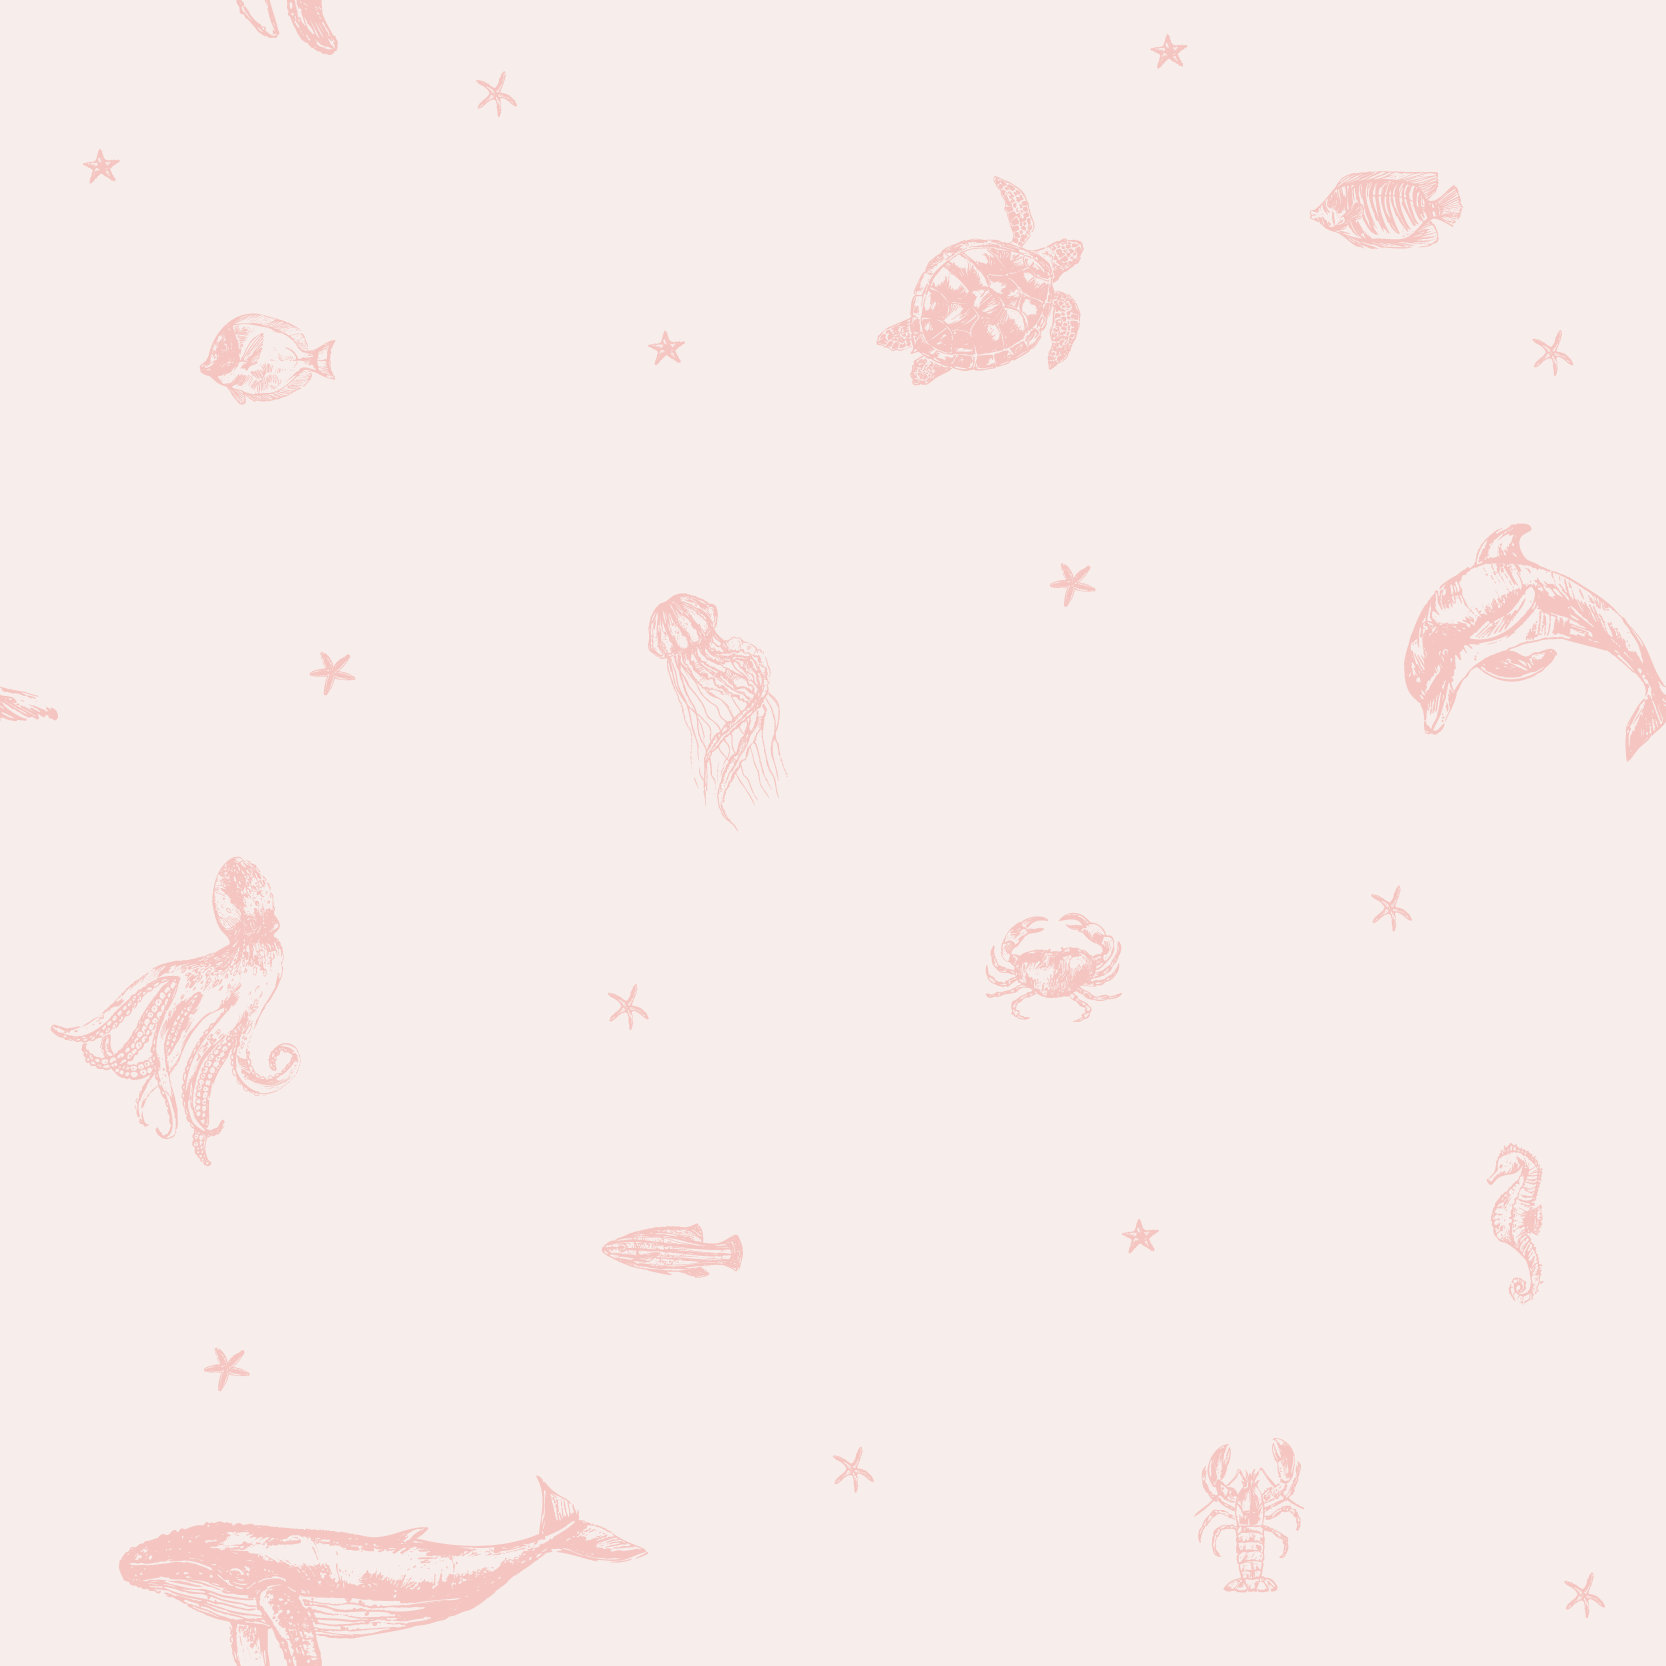 Starry Sea Life Coral Pink Sea Animals and Starfish Full Pattern